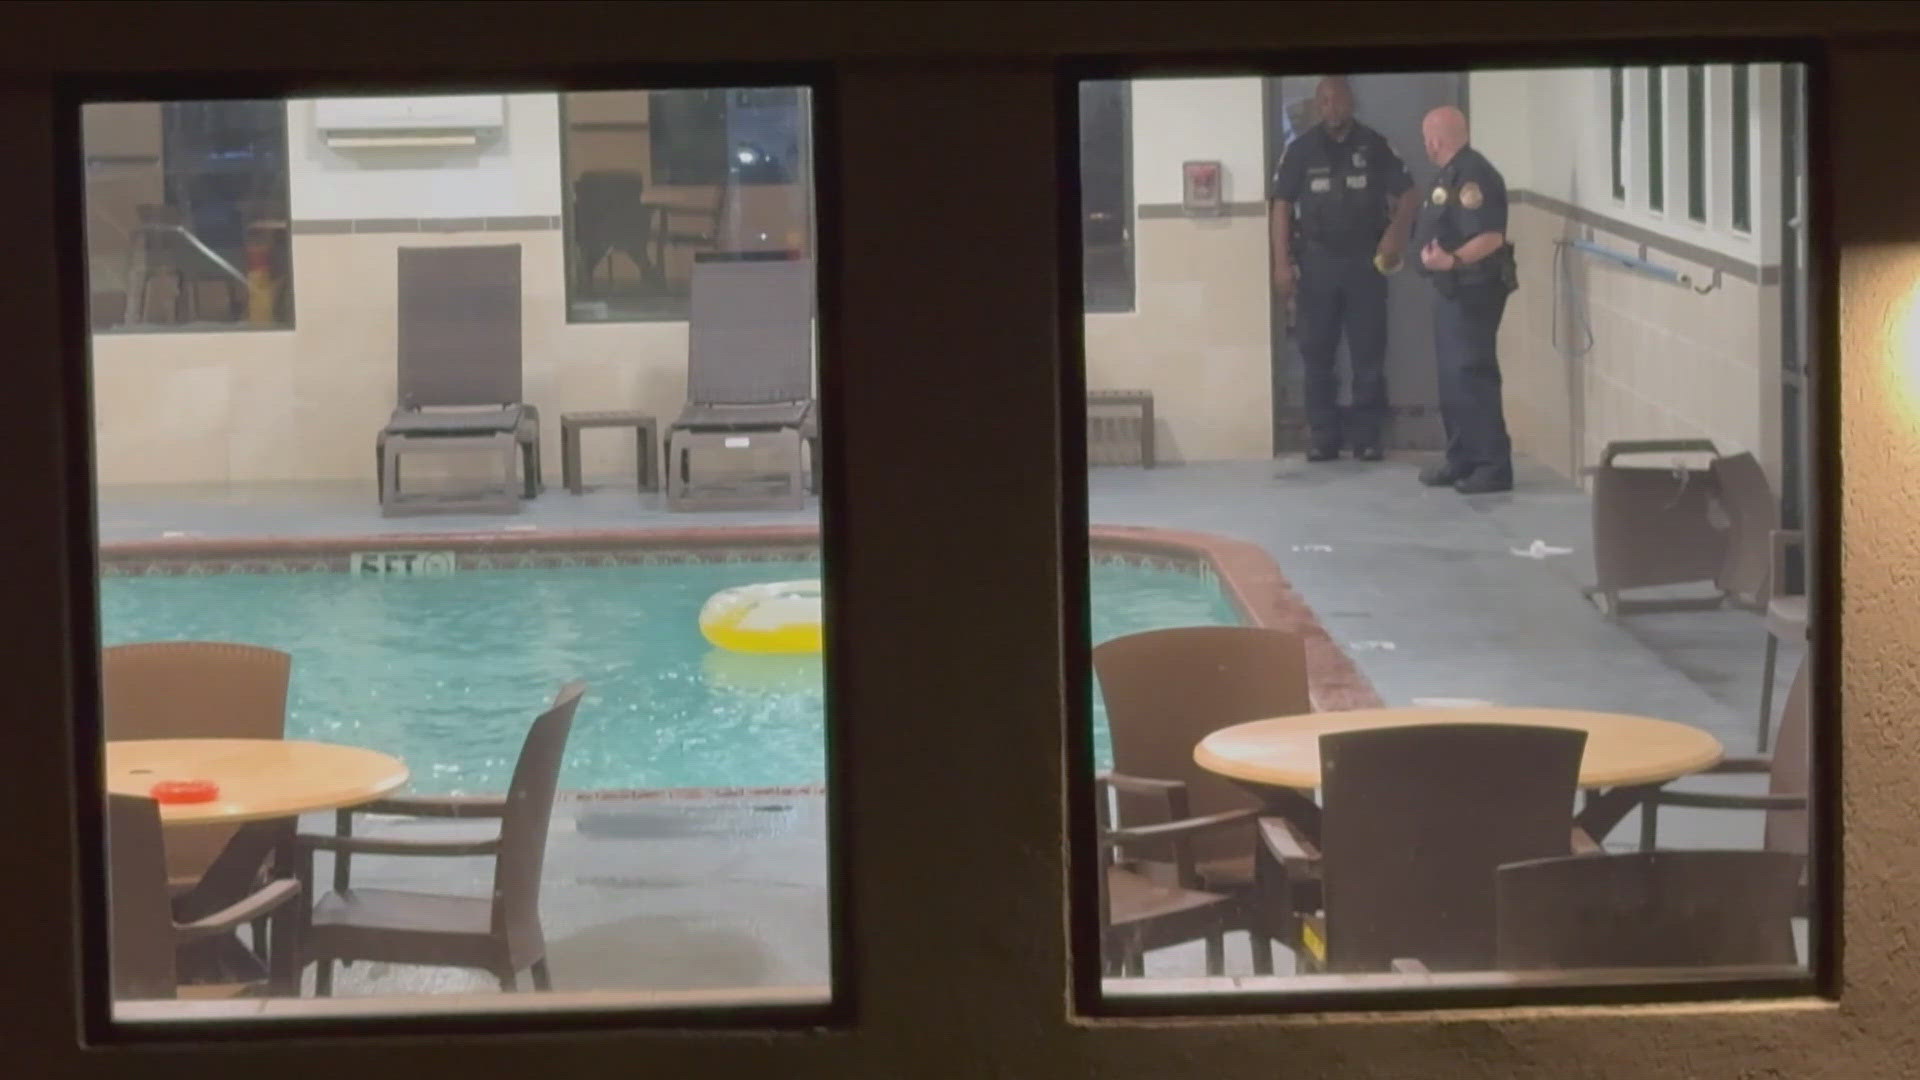 Memphis police confirmed a 4-year-old died after drowning at a hotel in Cordova on Thursday, June 27.